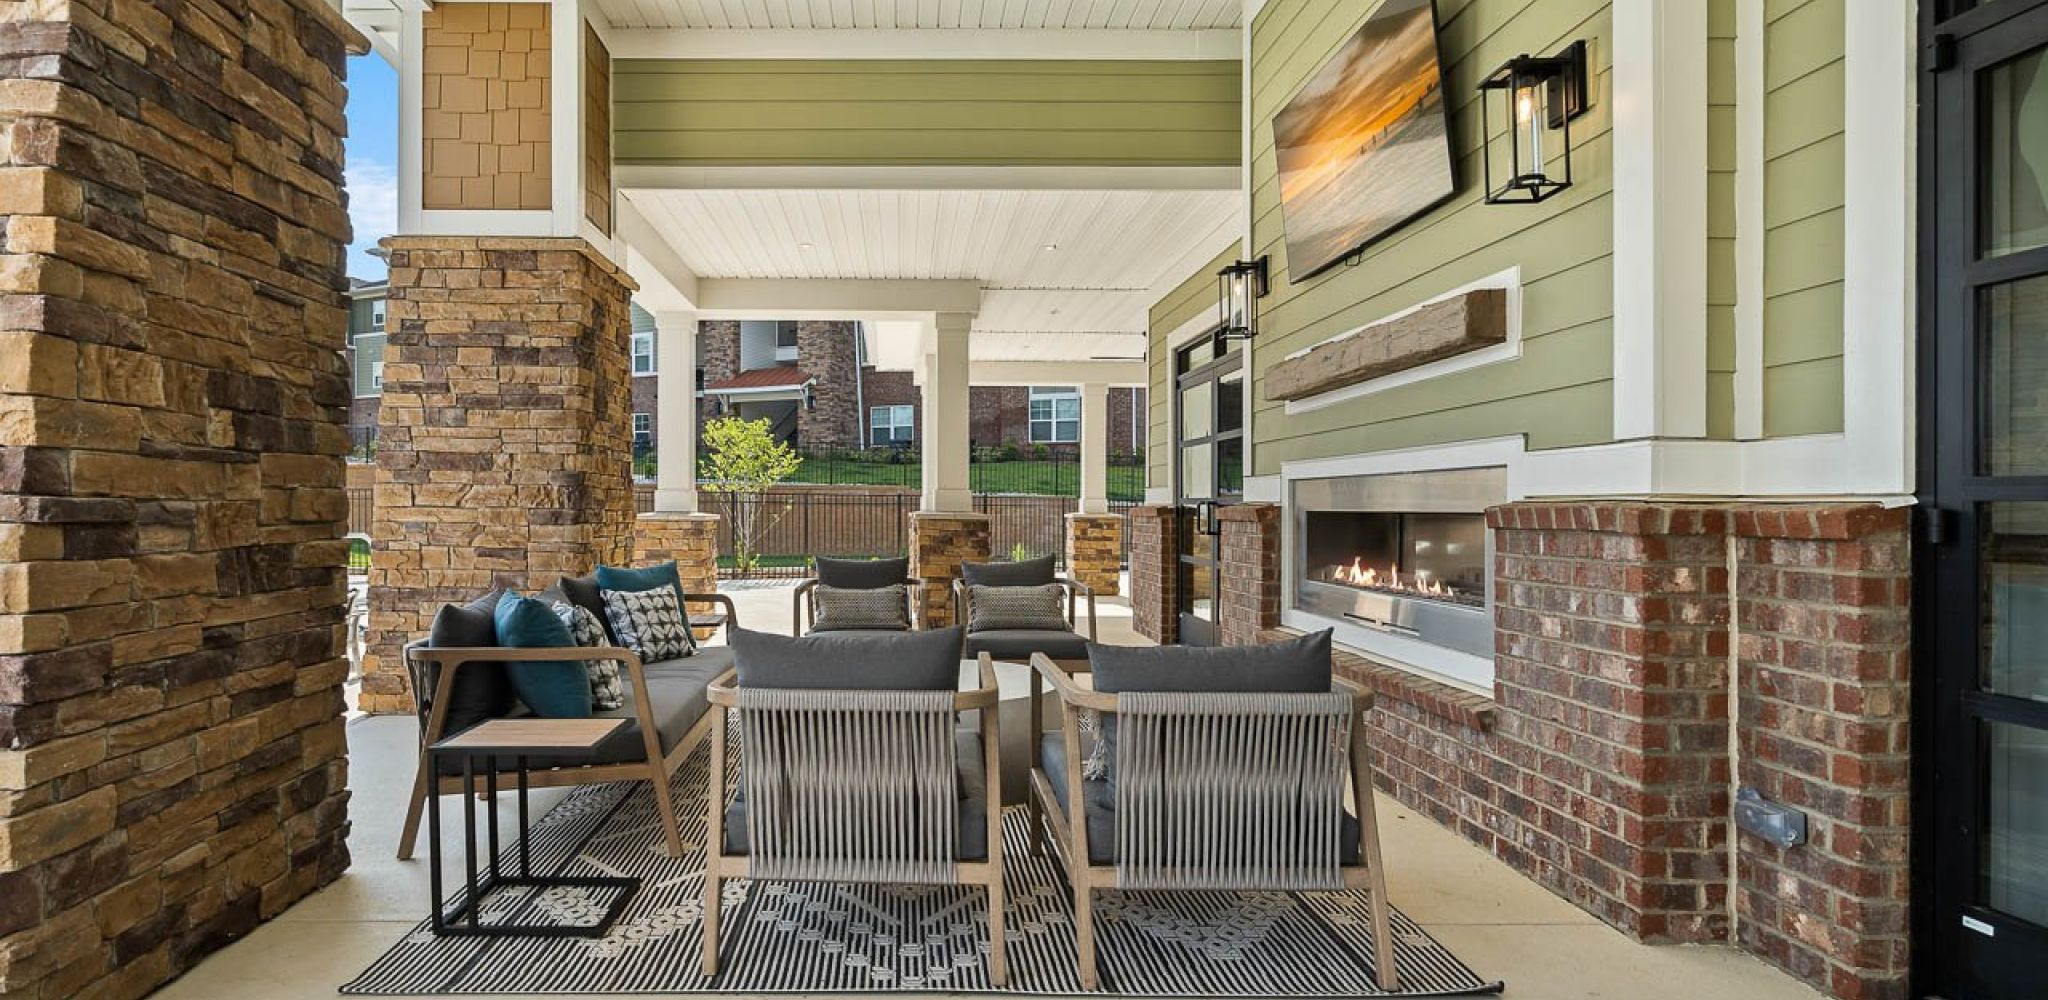 Hawthorne Waterstone resident outdoor amenity area with a fireplace and surrounding seating